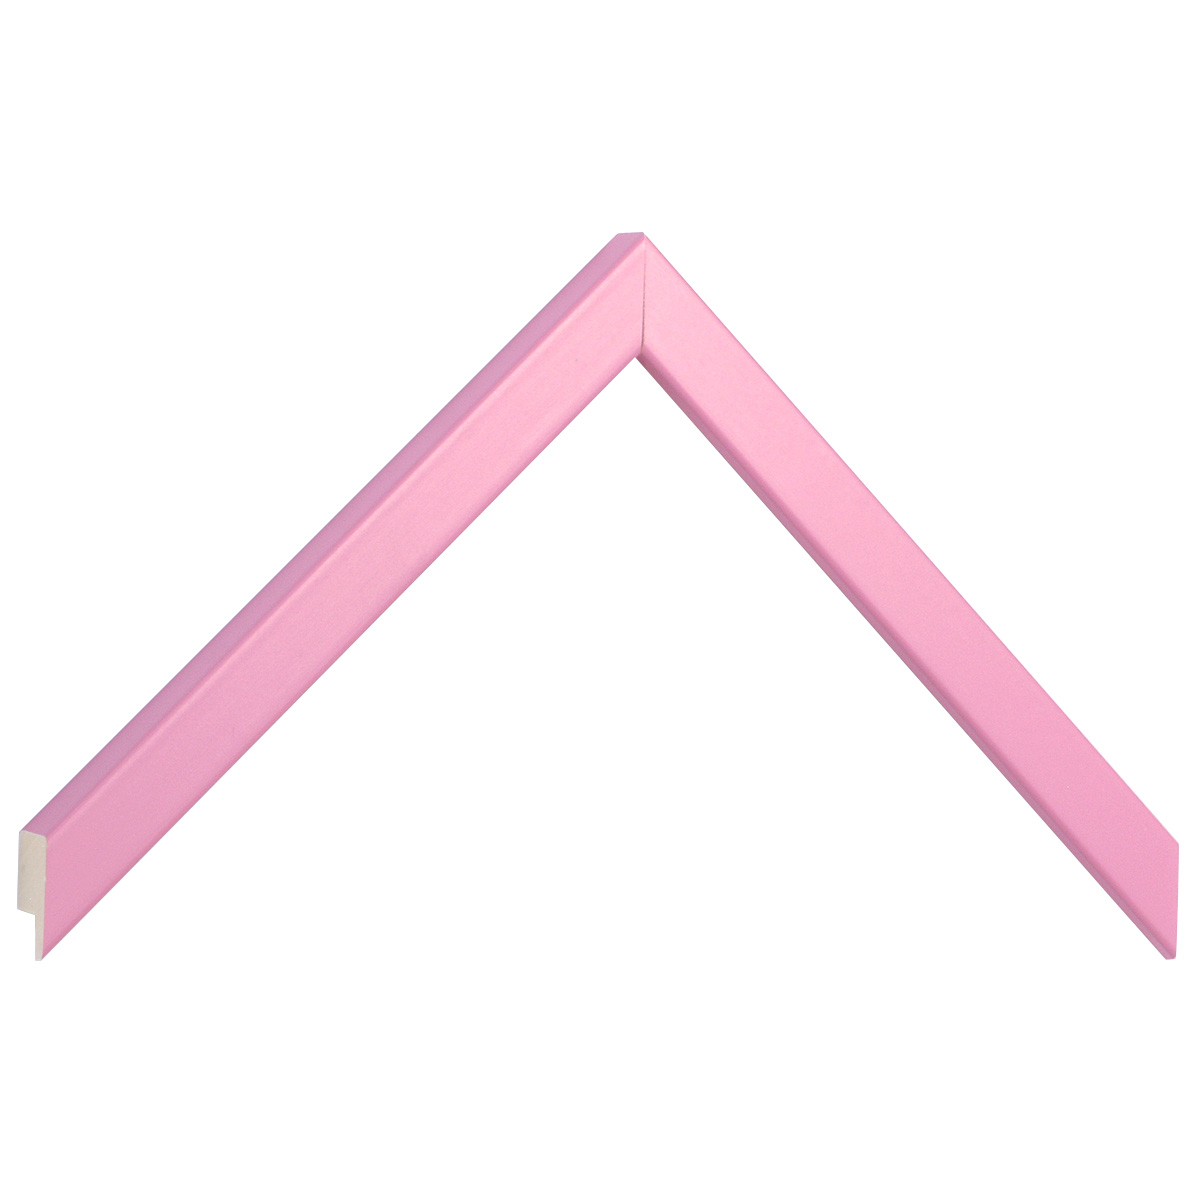 Moulding ayous width 15mm height 14 - pink - Sample